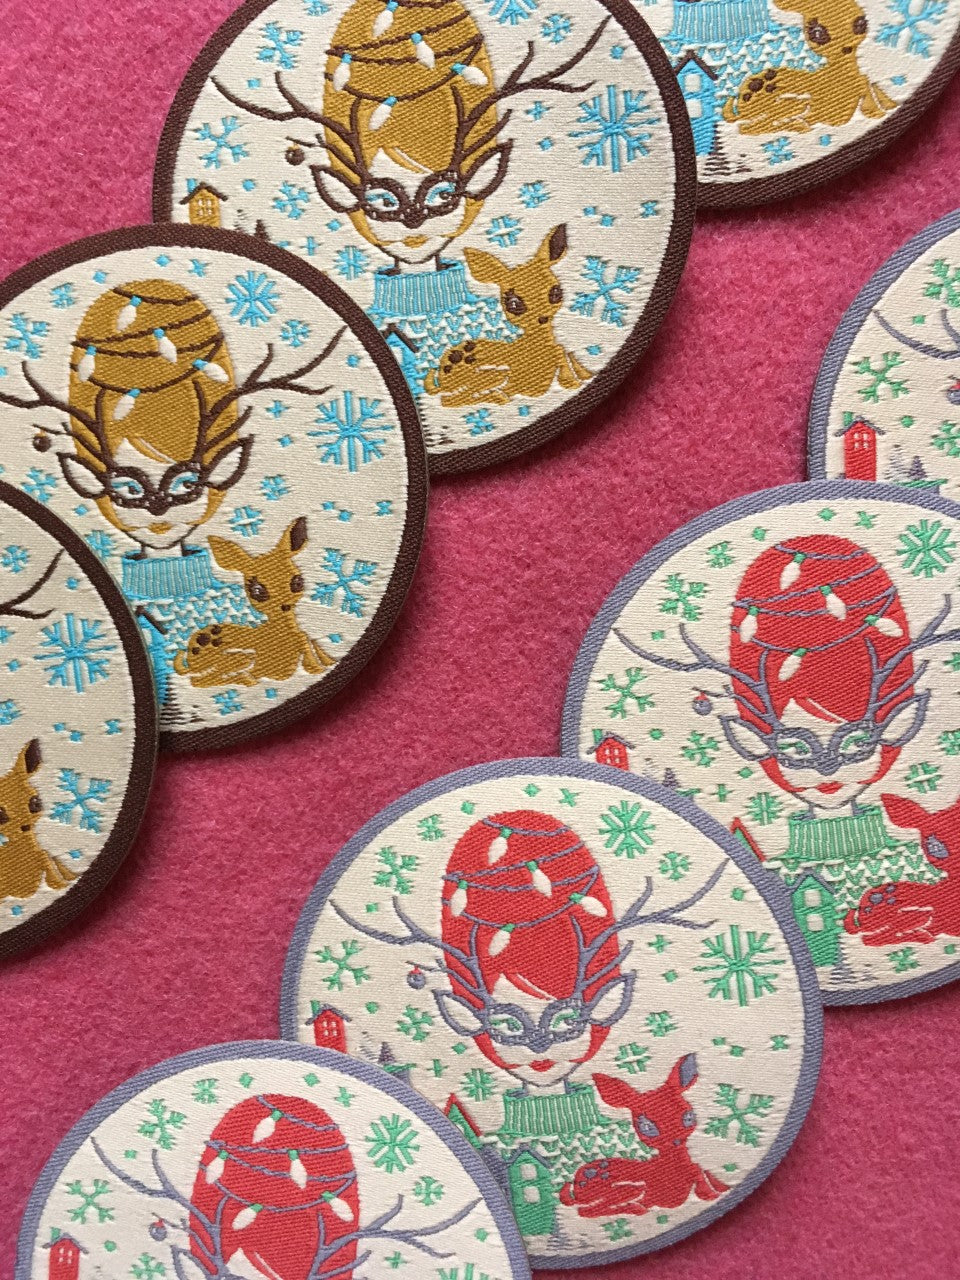 2 rows of colorful holiday themed iron on patches with reindeer and snowflakes